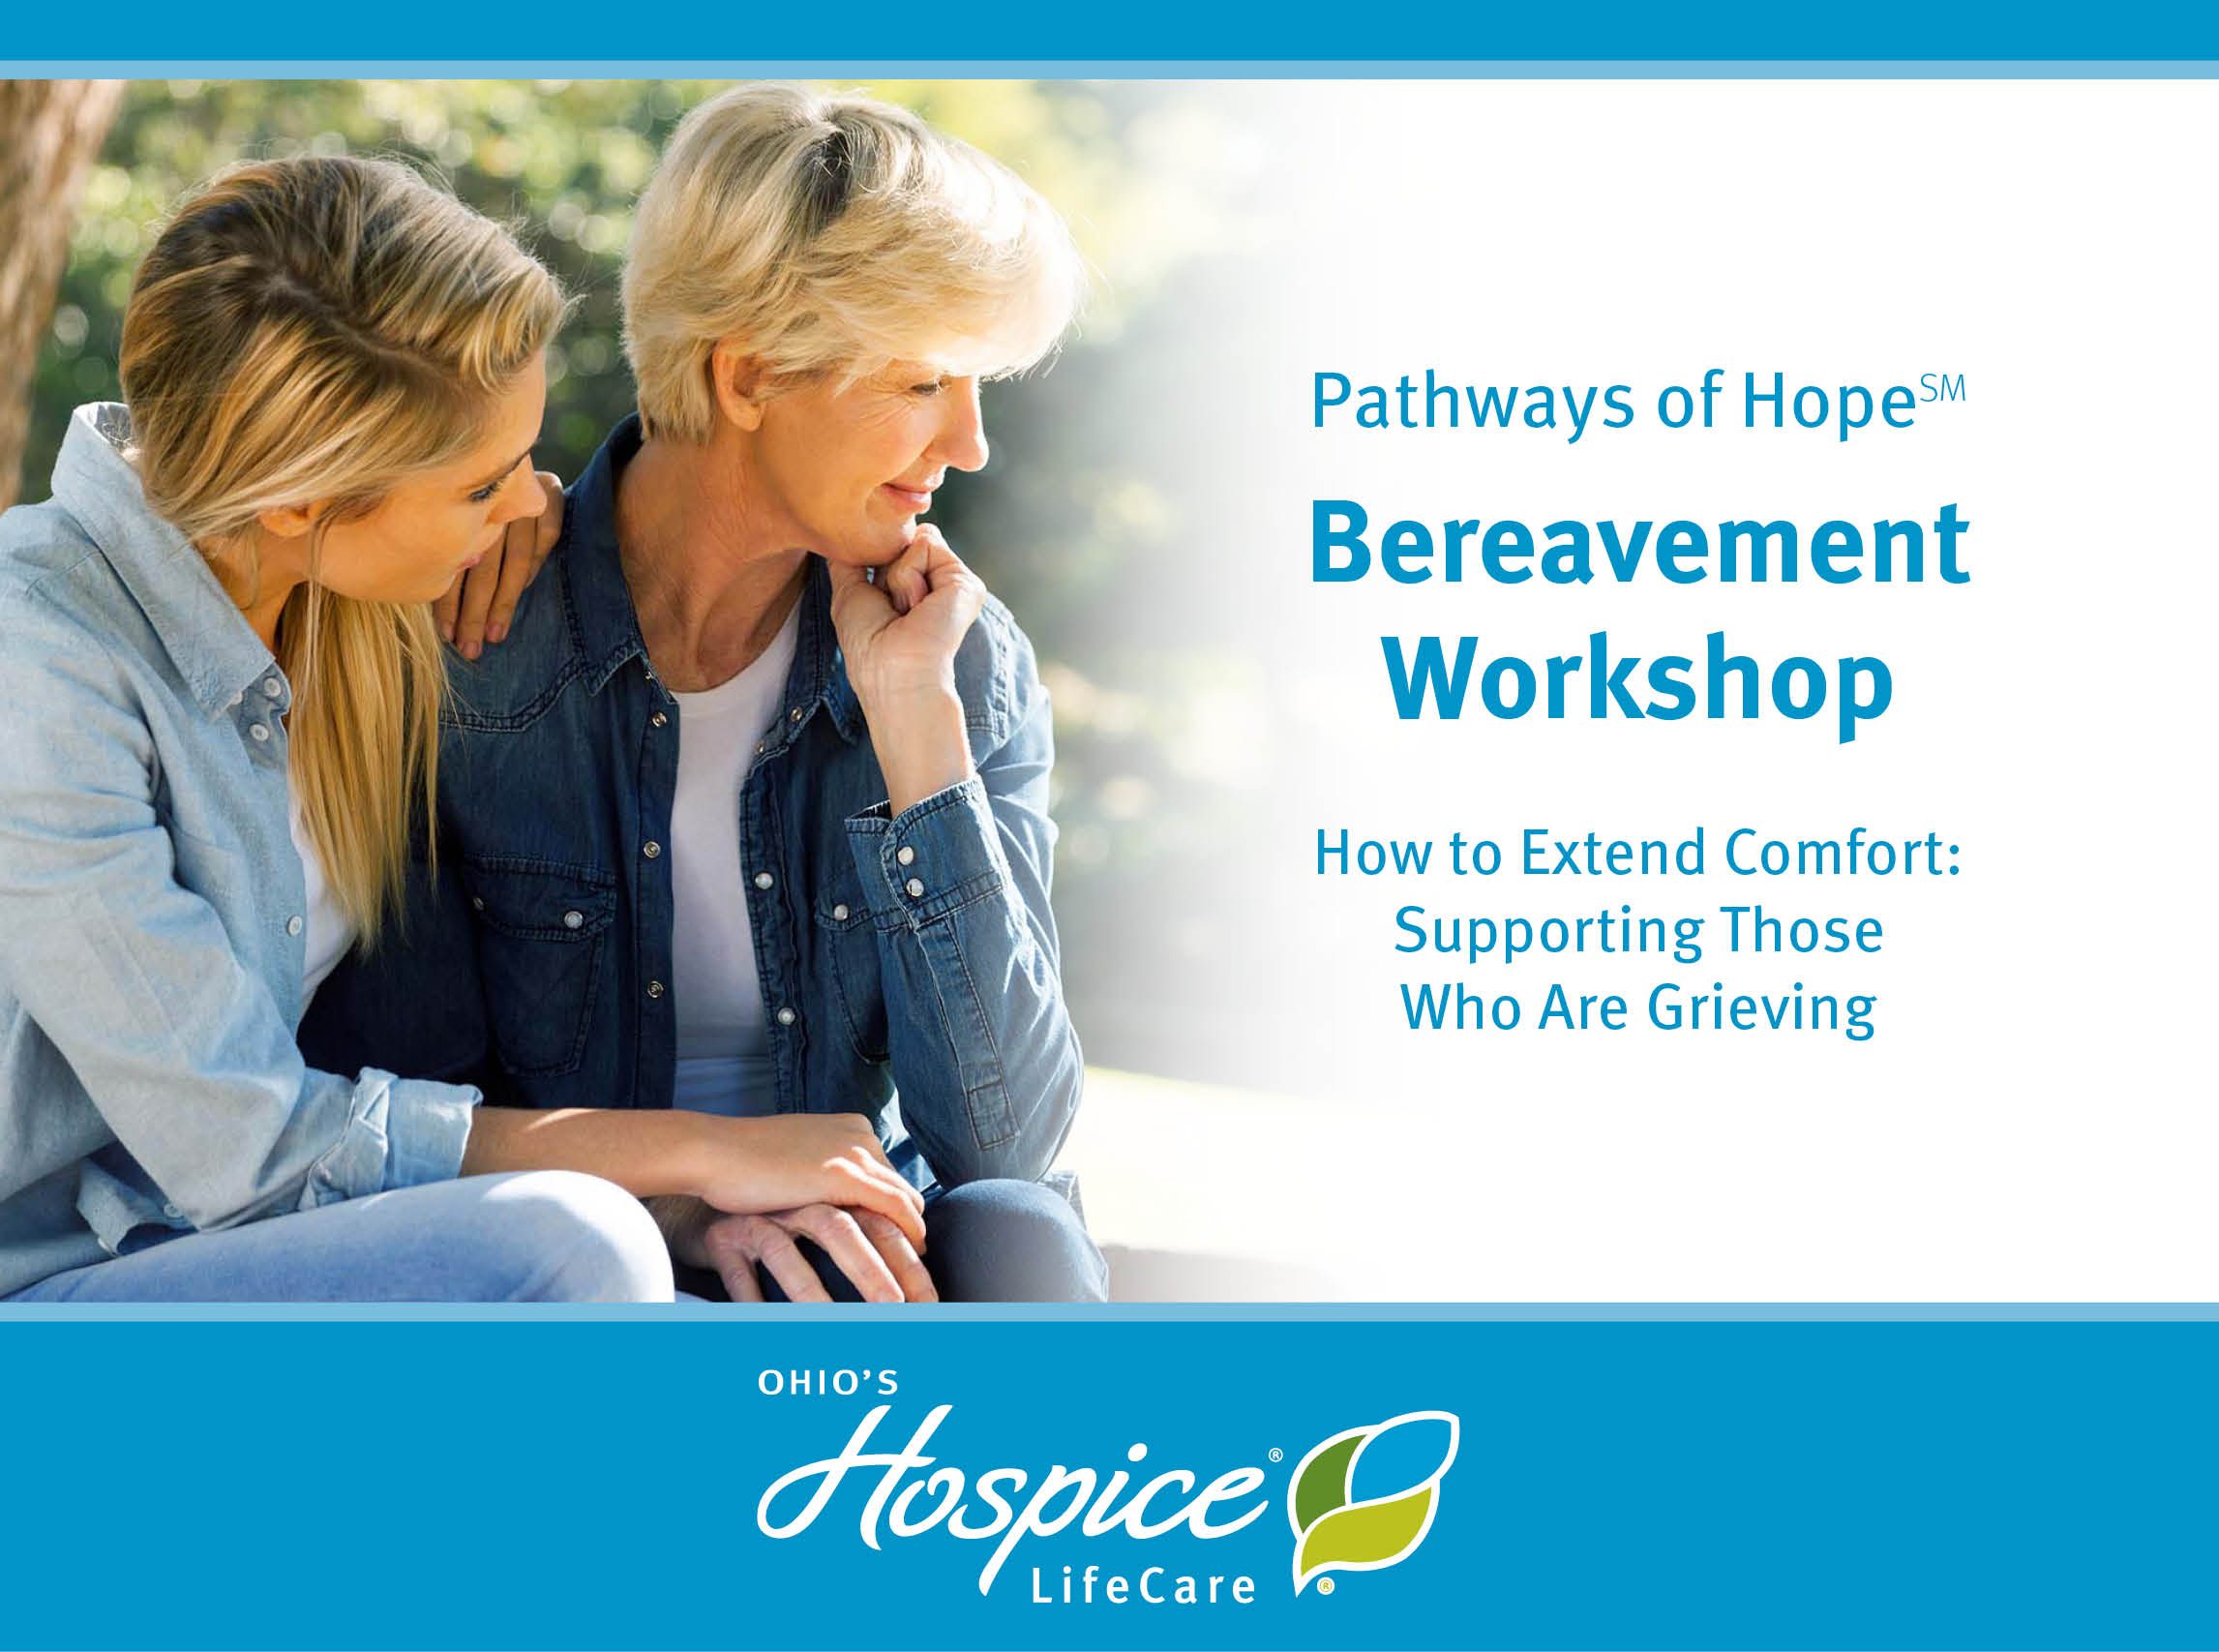 Pathways of Hope Bereavement Workshop - How to Extend Comfort: Supporting Those Who Are Grieving